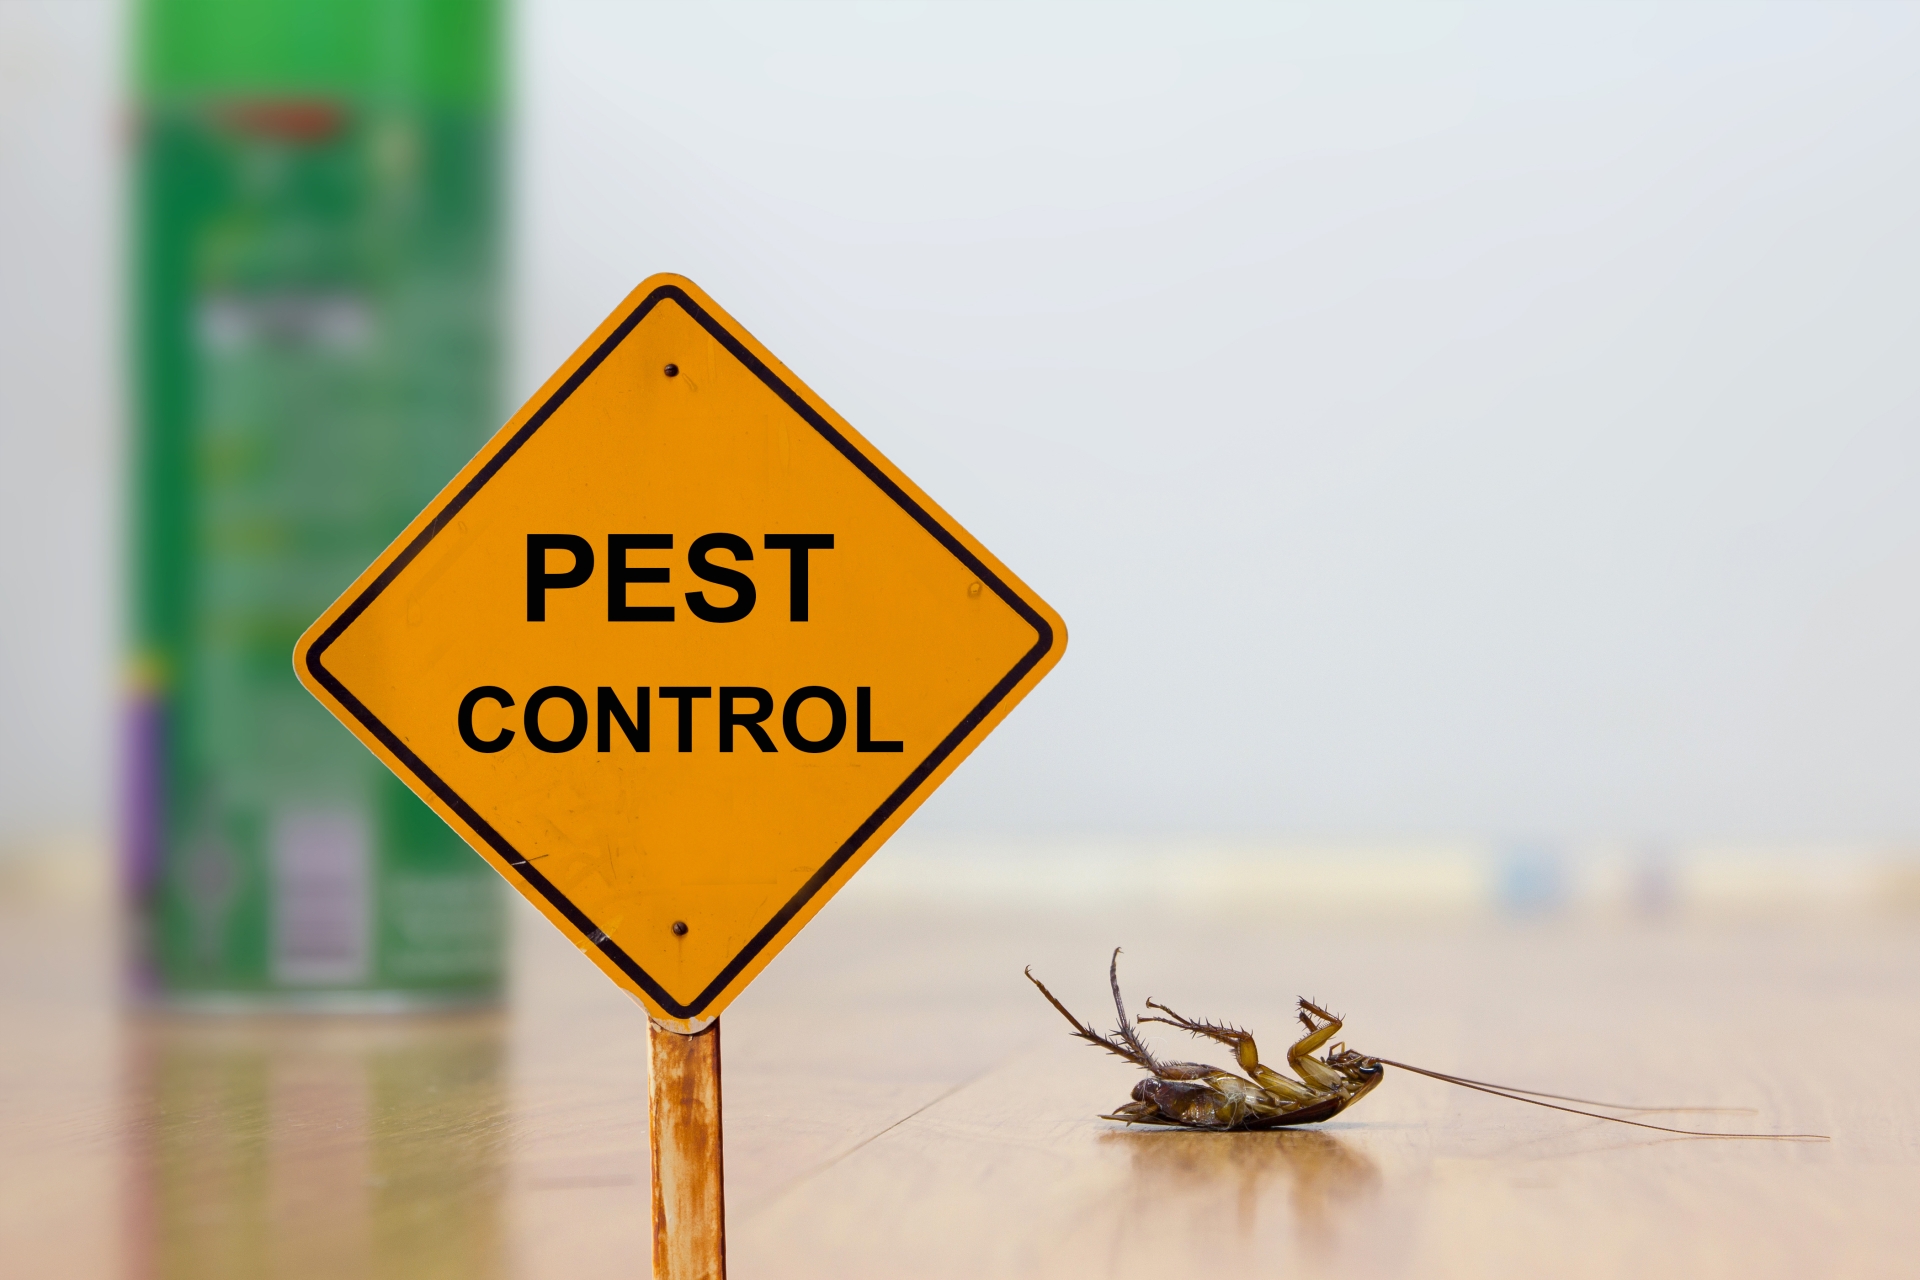 24 Hour Pest Control, Pest Control in Norbury, SW16. Call Now 020 8166 9746